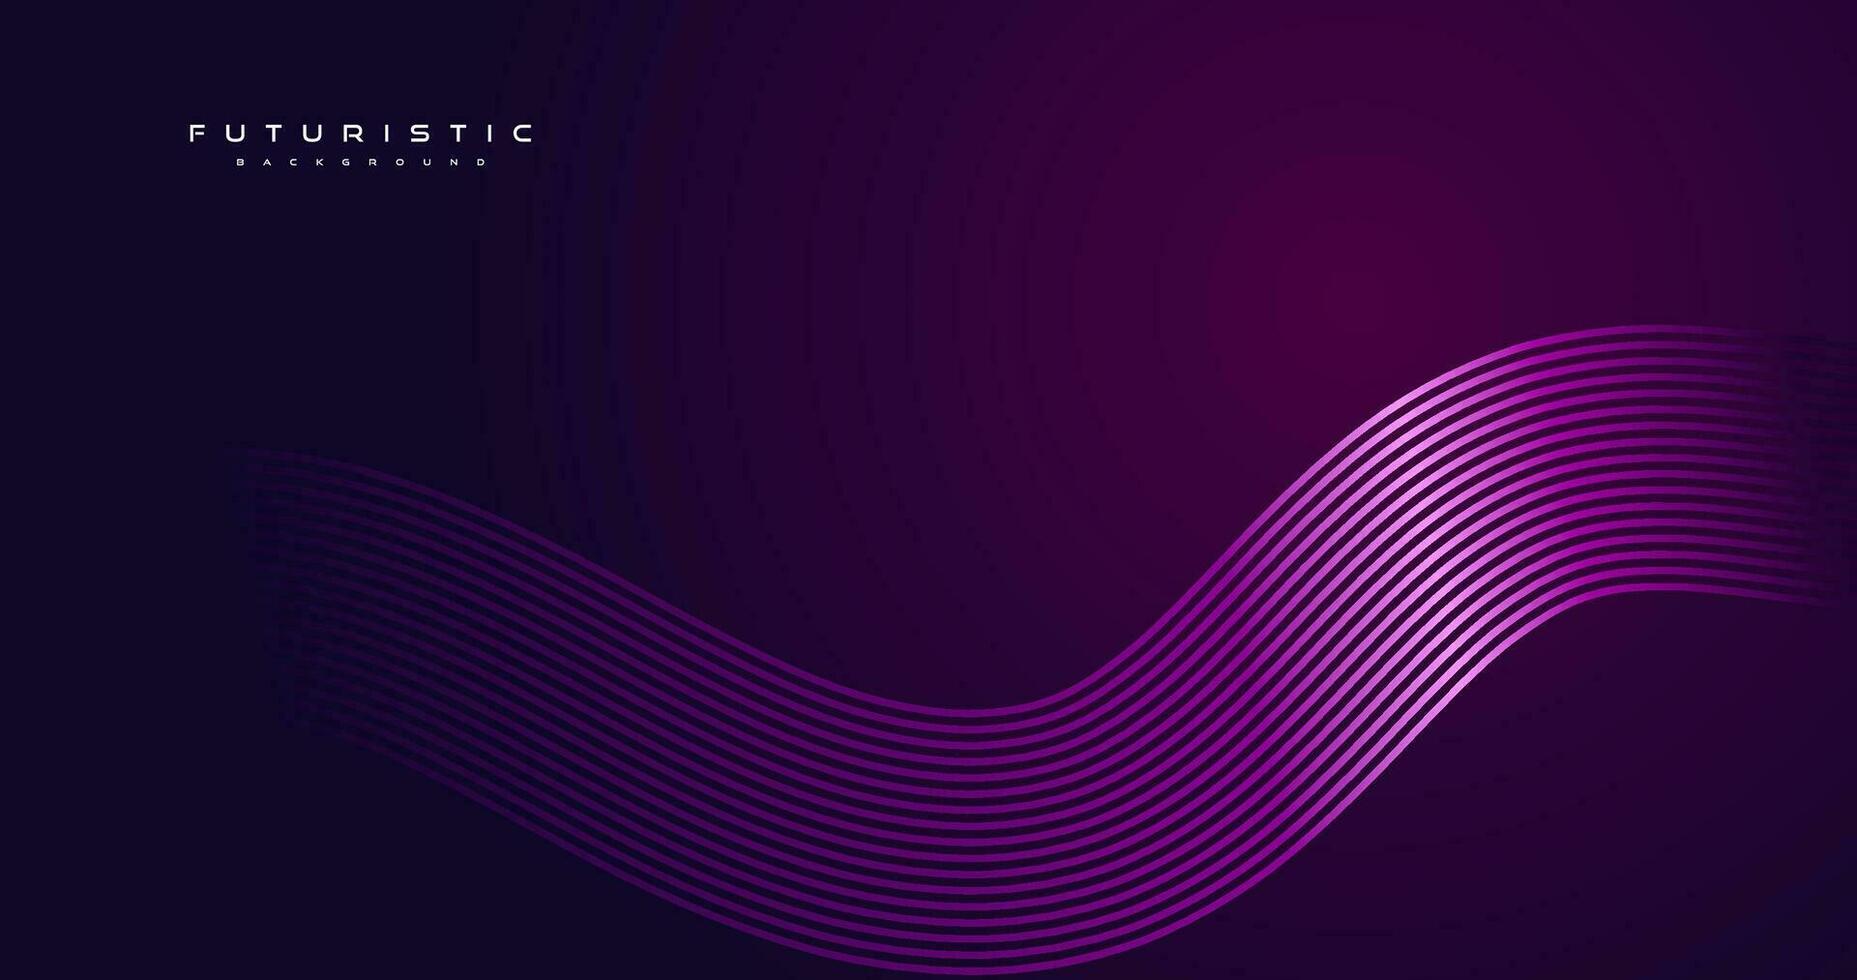 abstract modern futuristic dark background with glowing lines vector